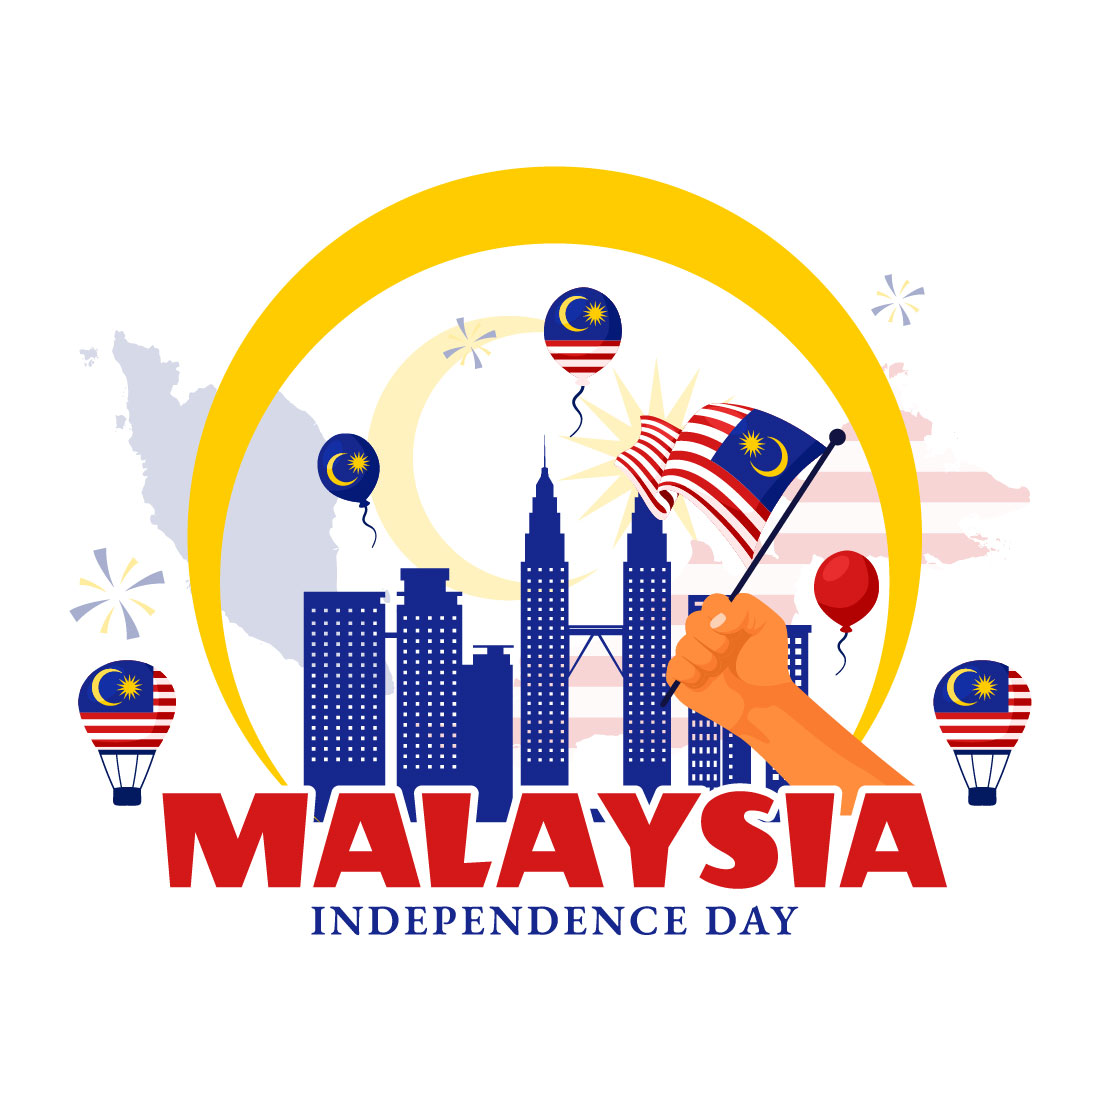 12 Happy Malaysia Day Illustration cover image.